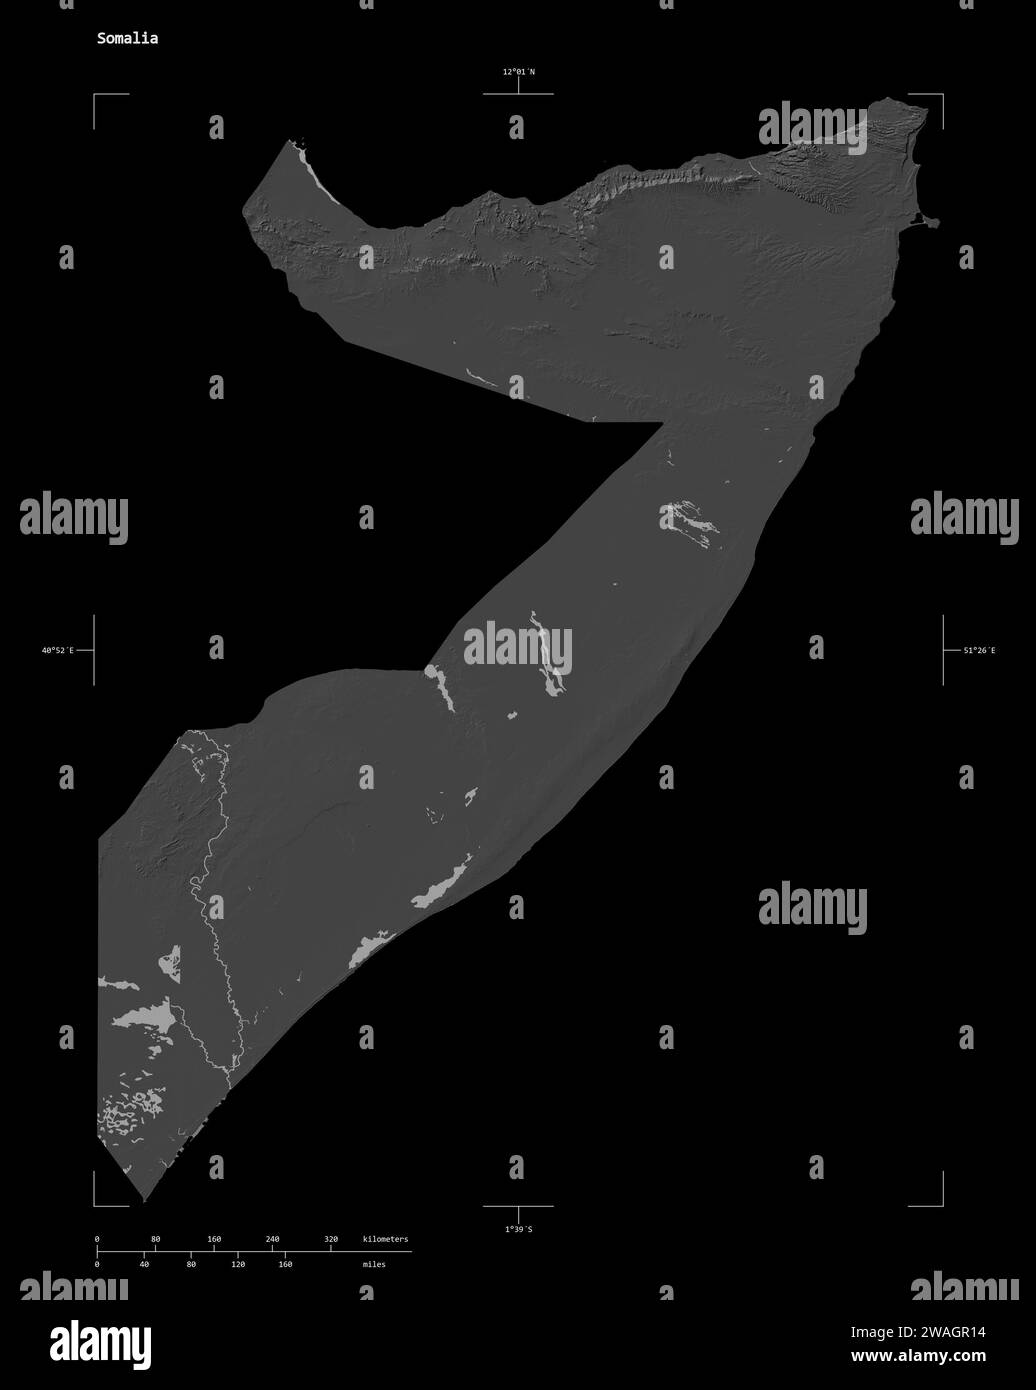 Shape of a Bilevel elevation map with lakes and rivers of the Somalia, with distance scale and map border coordinates, isolated on black Stock Photo